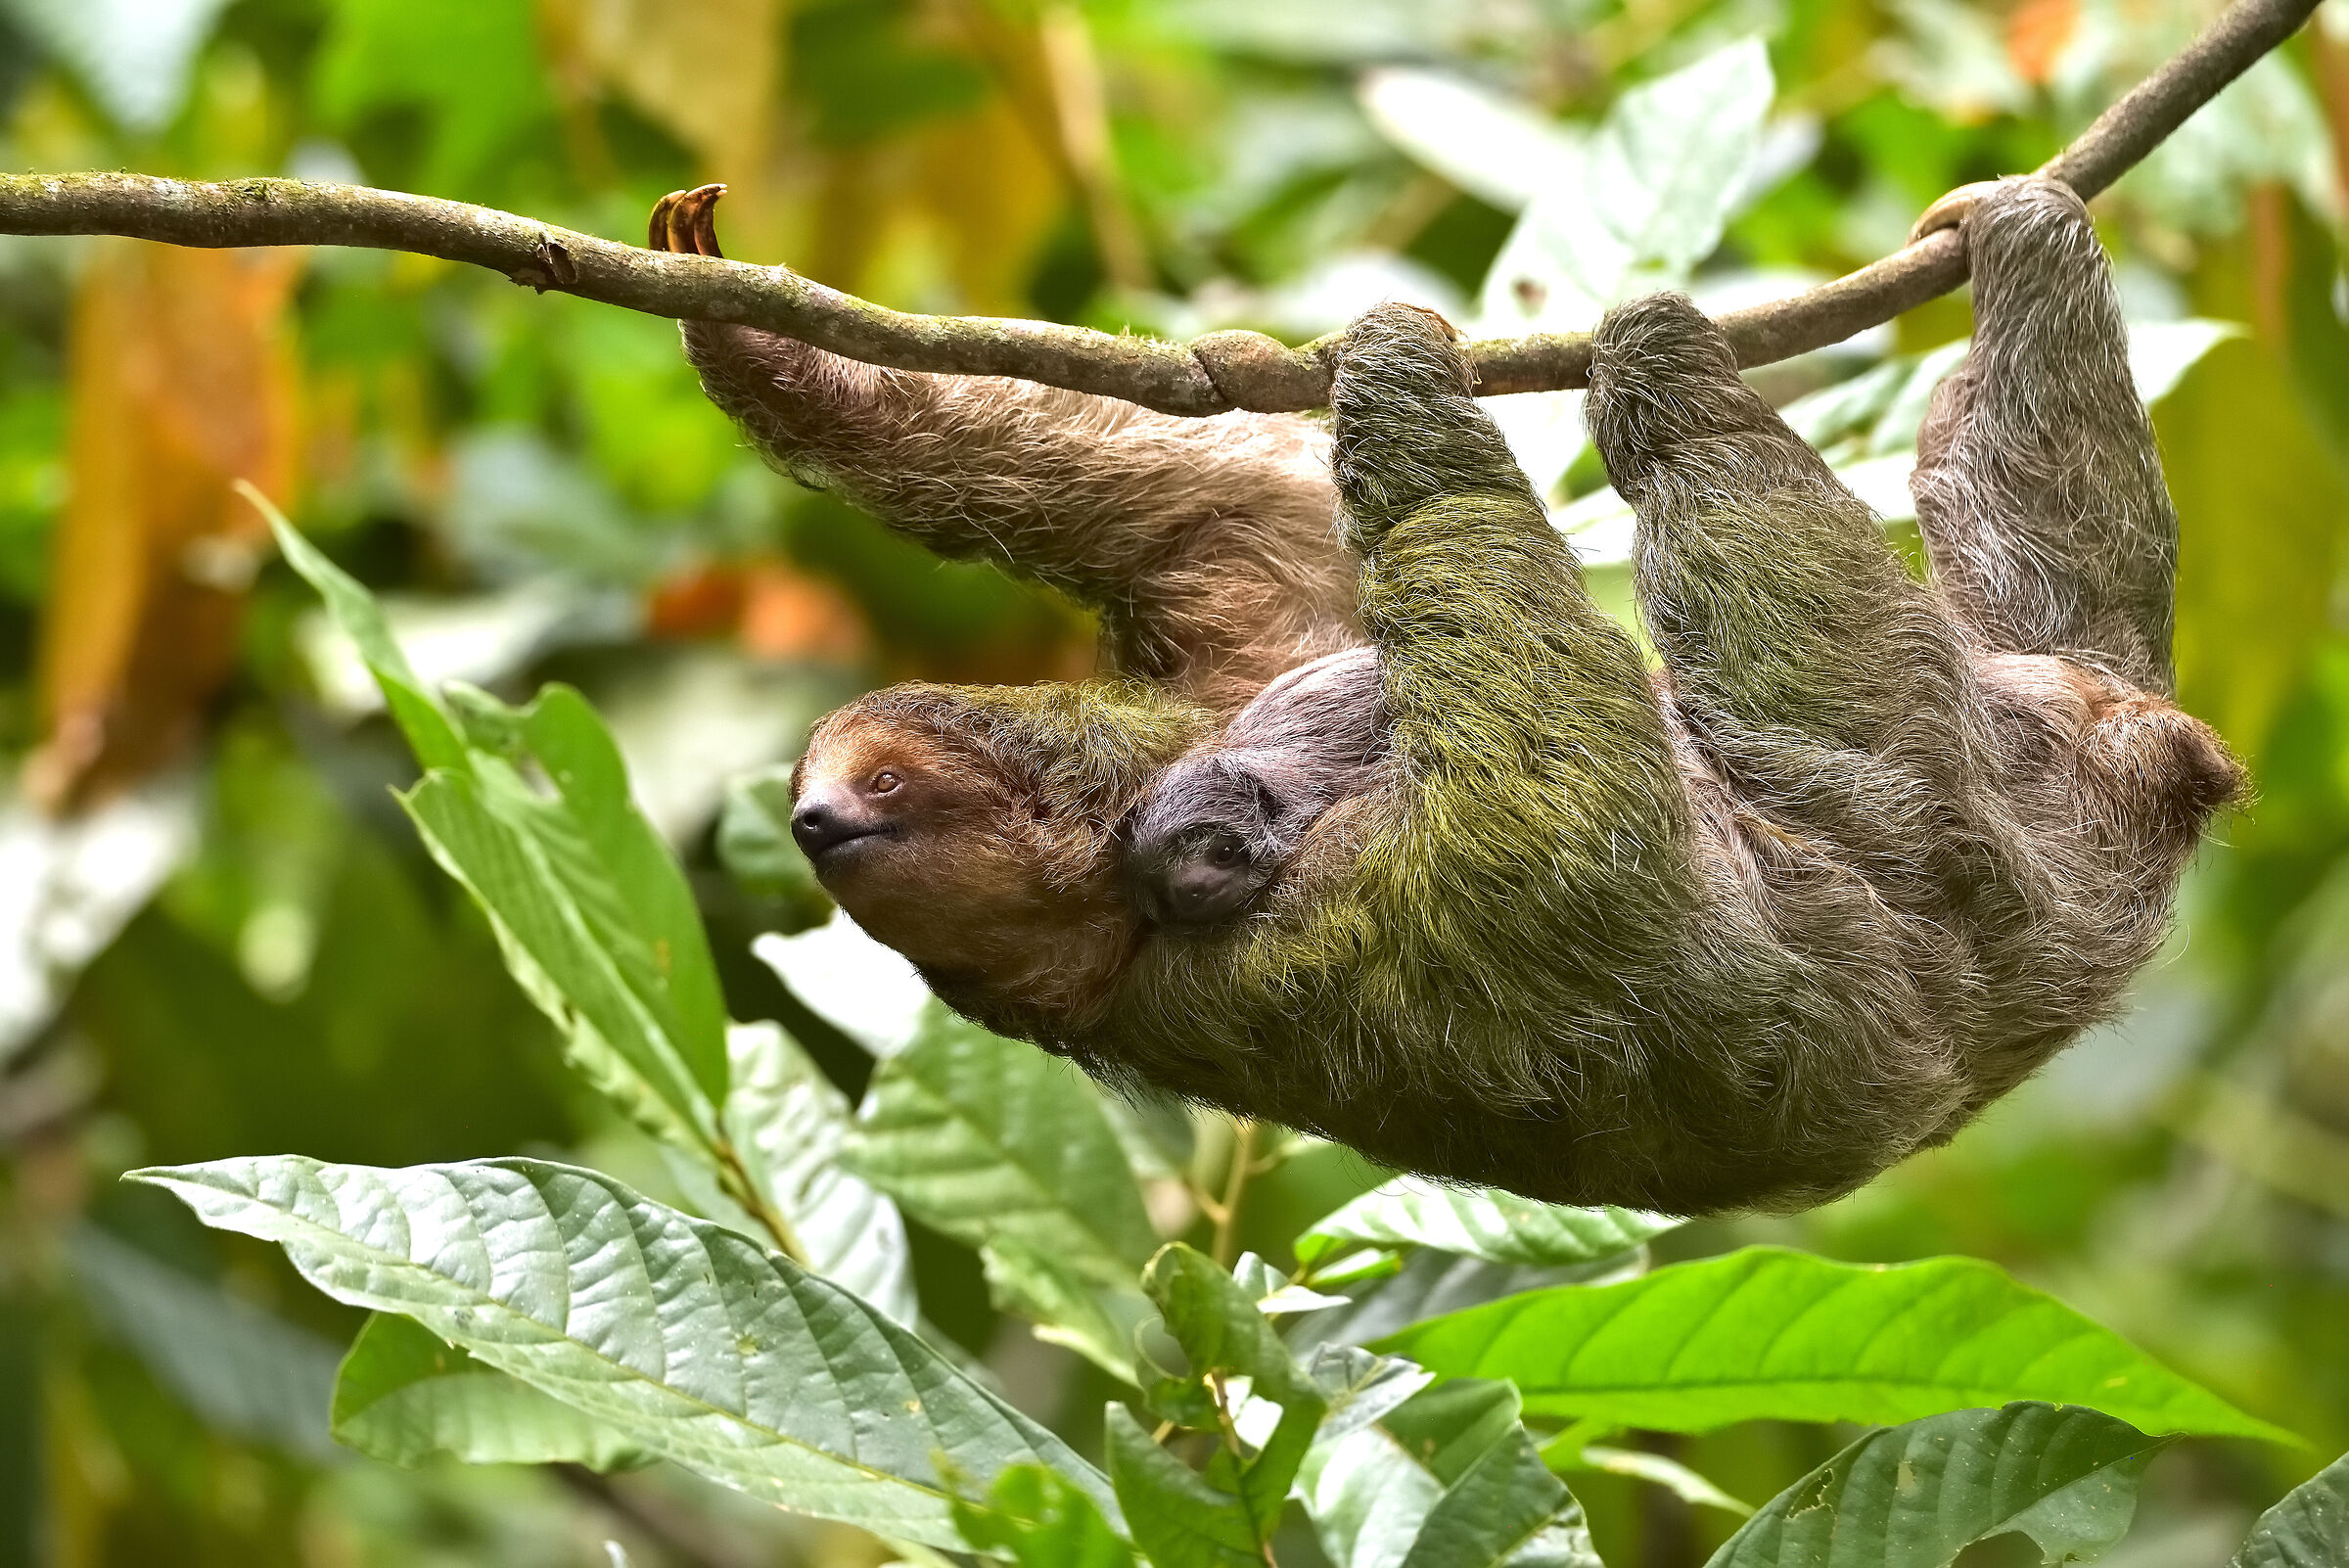 A three-toed sloth moves slowly through the rainforest...